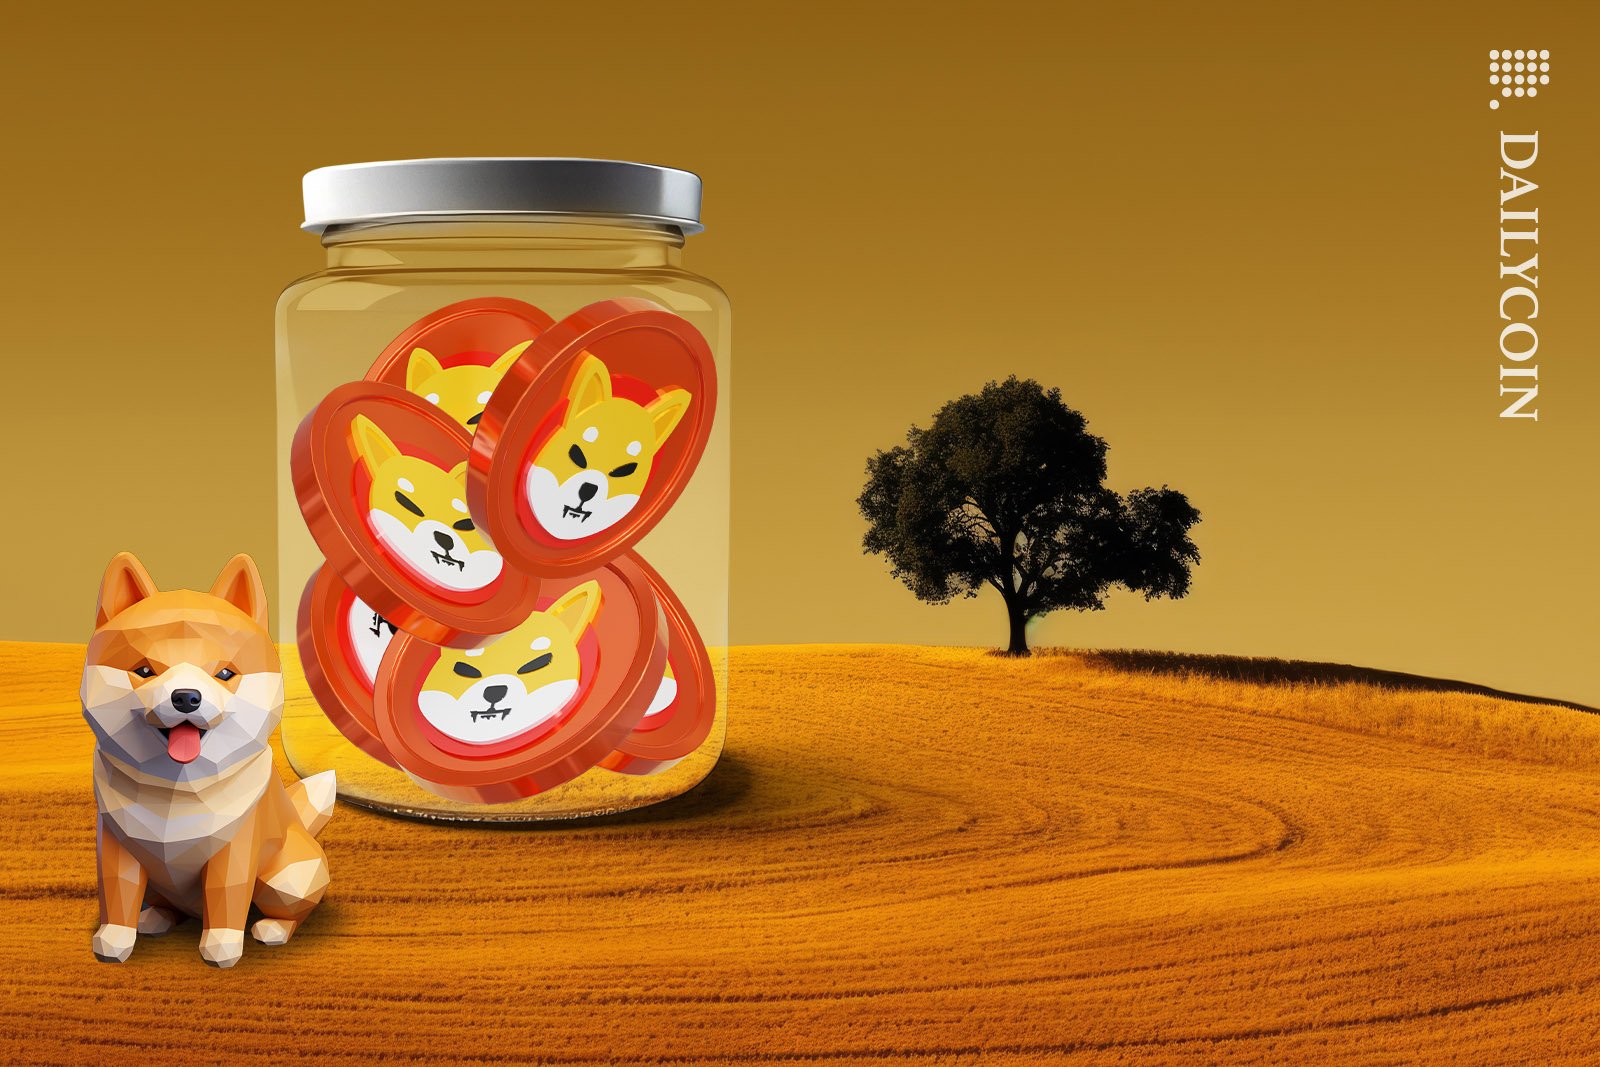 A jar filled with SHIB tokens on a land and a friendly shiba inu welcomes you.